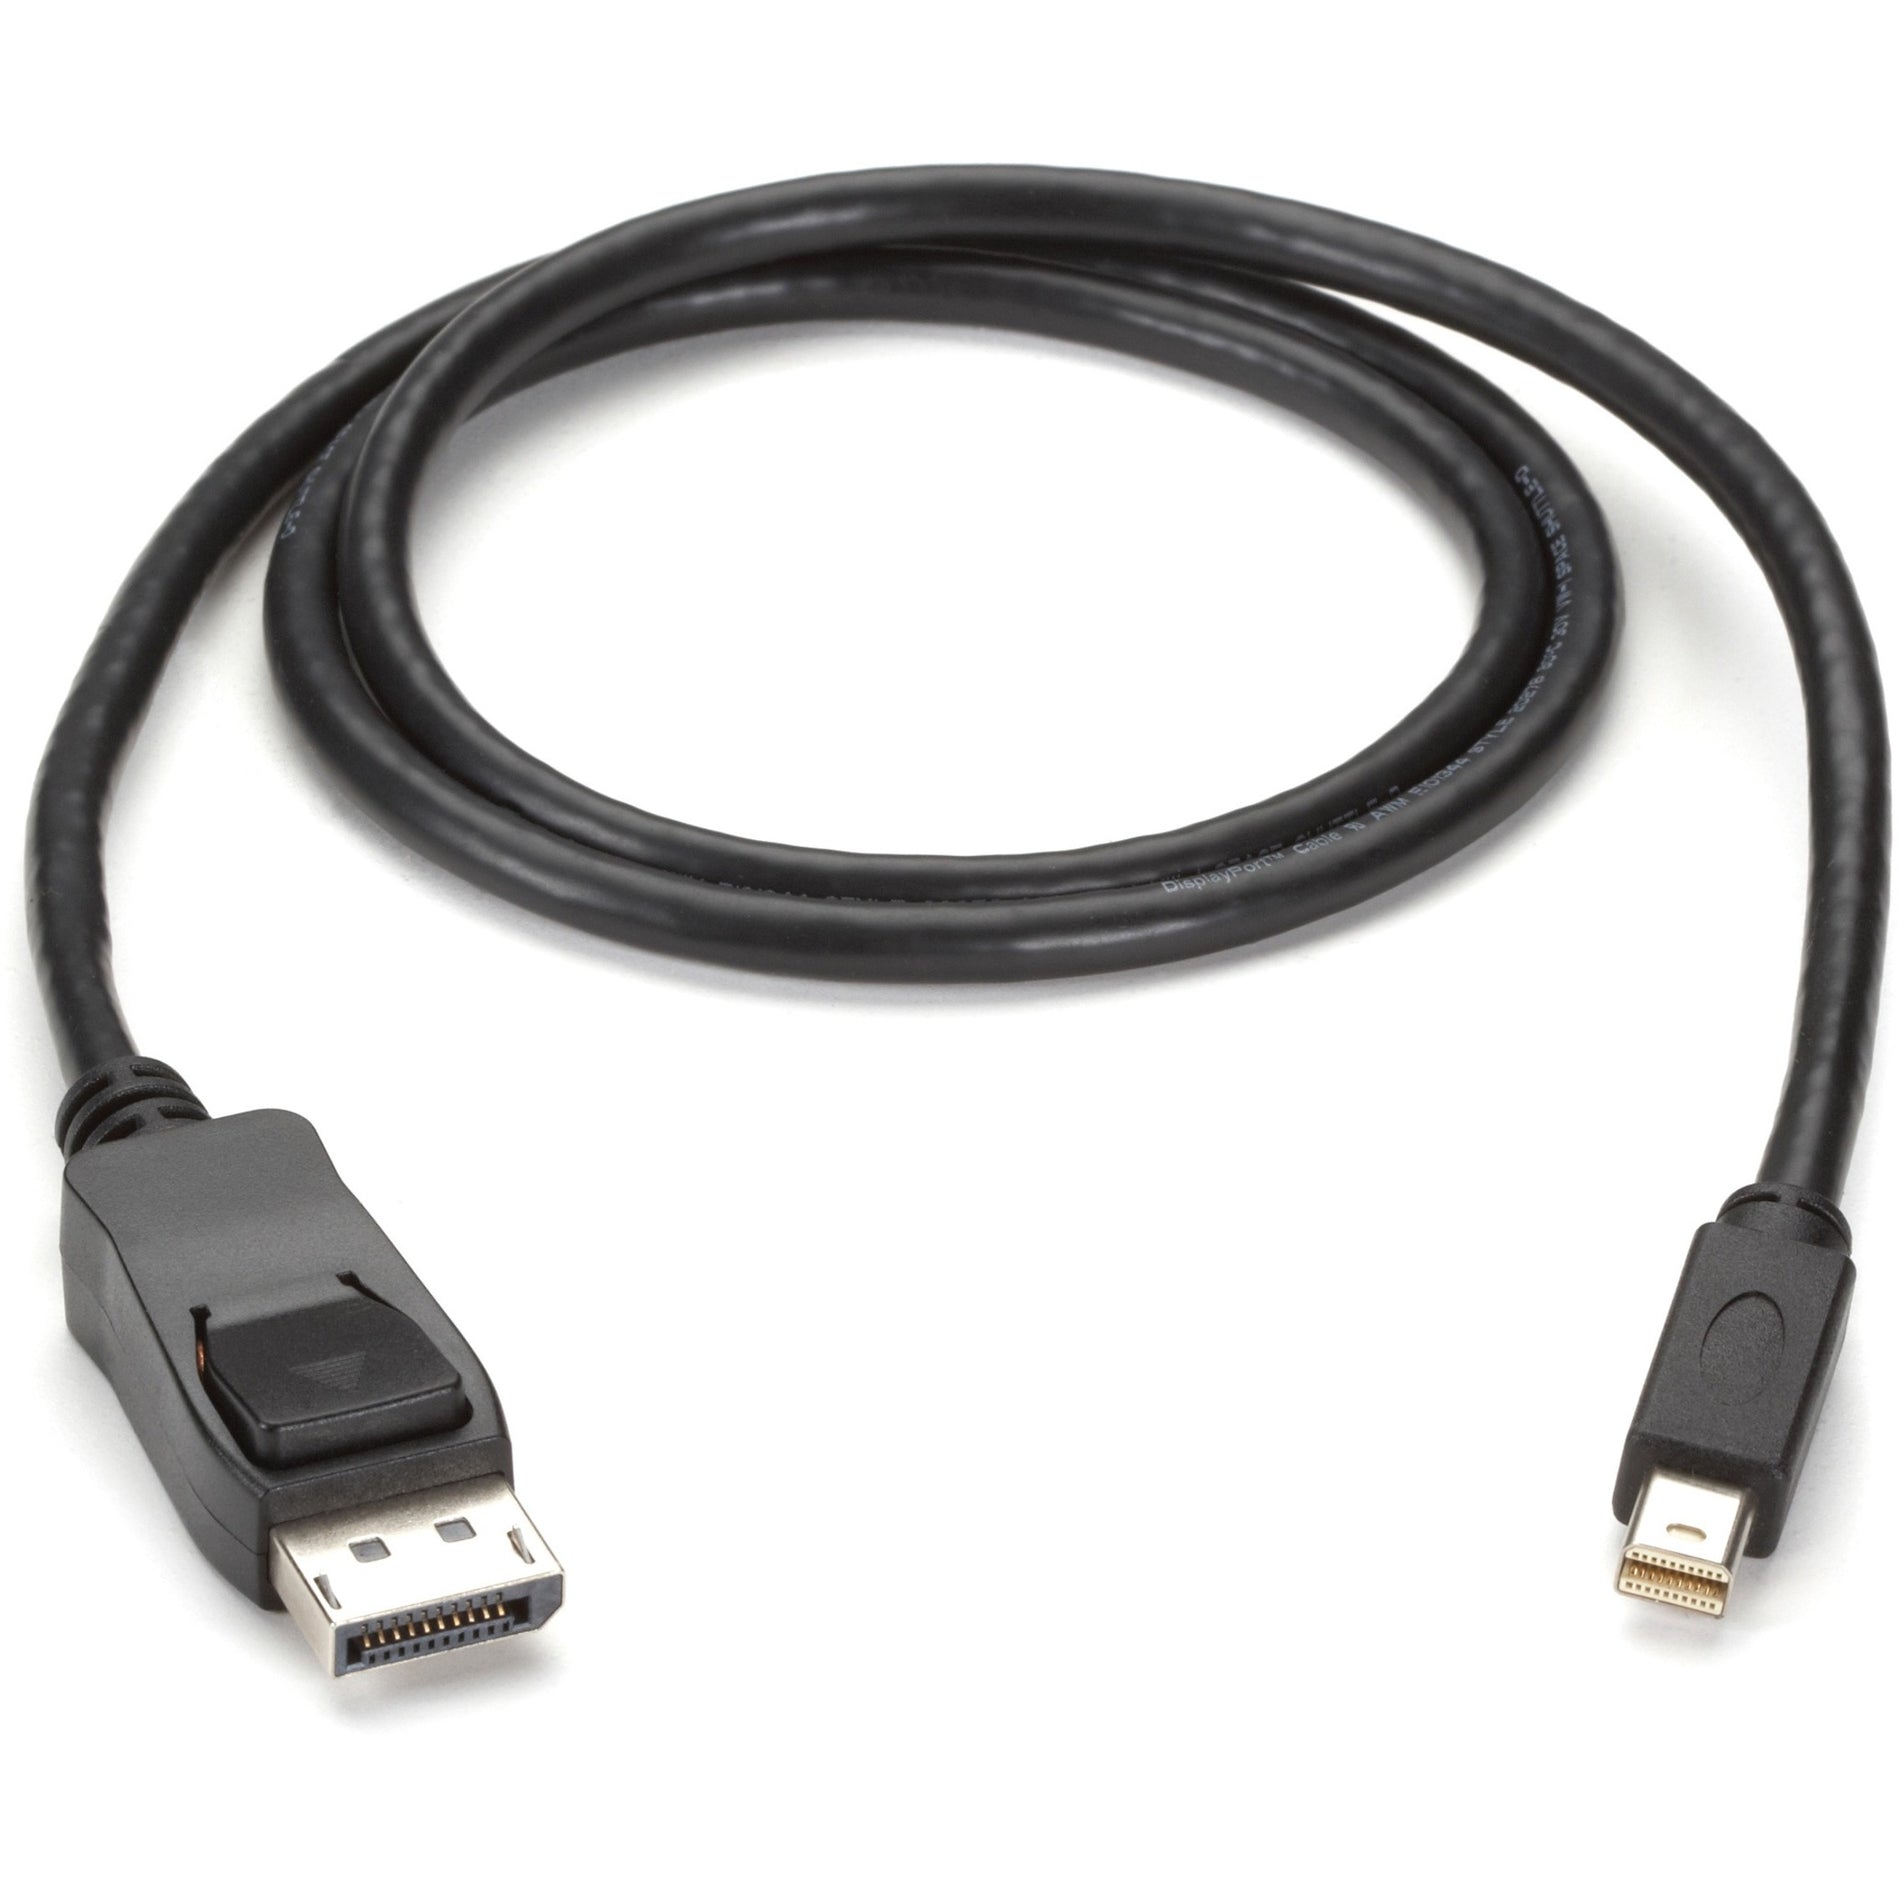 Black Box ENVMDPDP-0010-MM Mini DisplayPort to DisplayPort Cable, 10-ft. (3.0-m), Copper Conductor, Gold Plating, 5.4 Gbit/s Data Transfer Rate